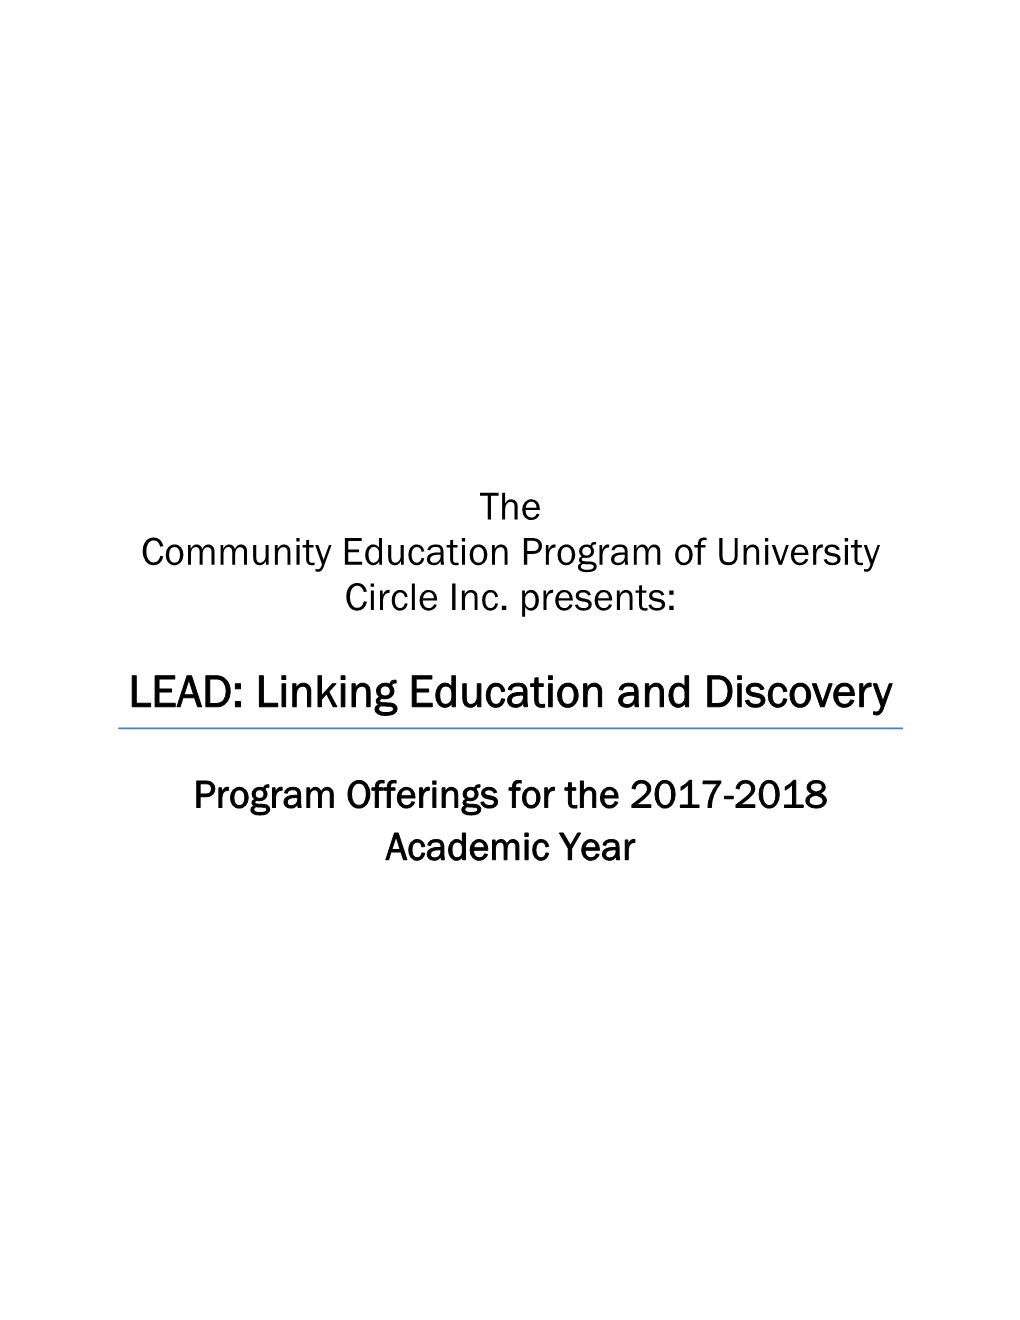 LEAD: Linking Education and Discovery